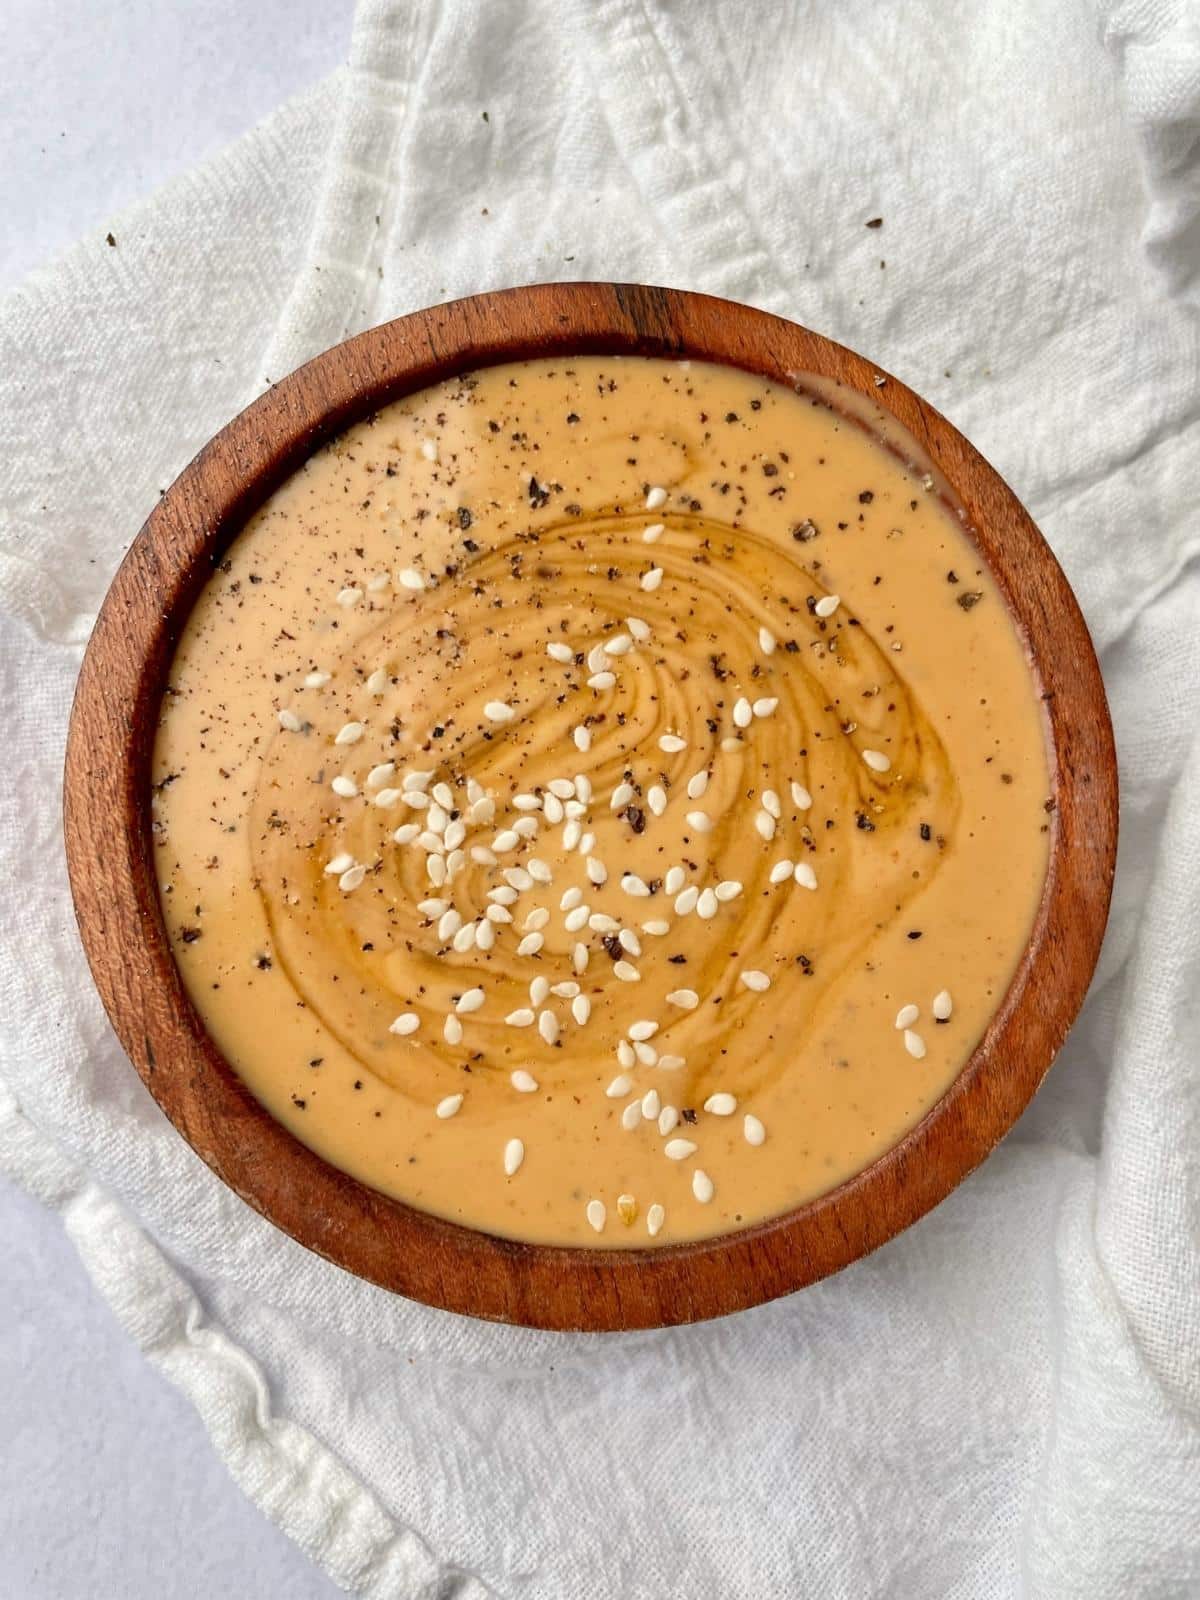 A creamy bowl of spicy Tahini sauce with sesame seeds on top.